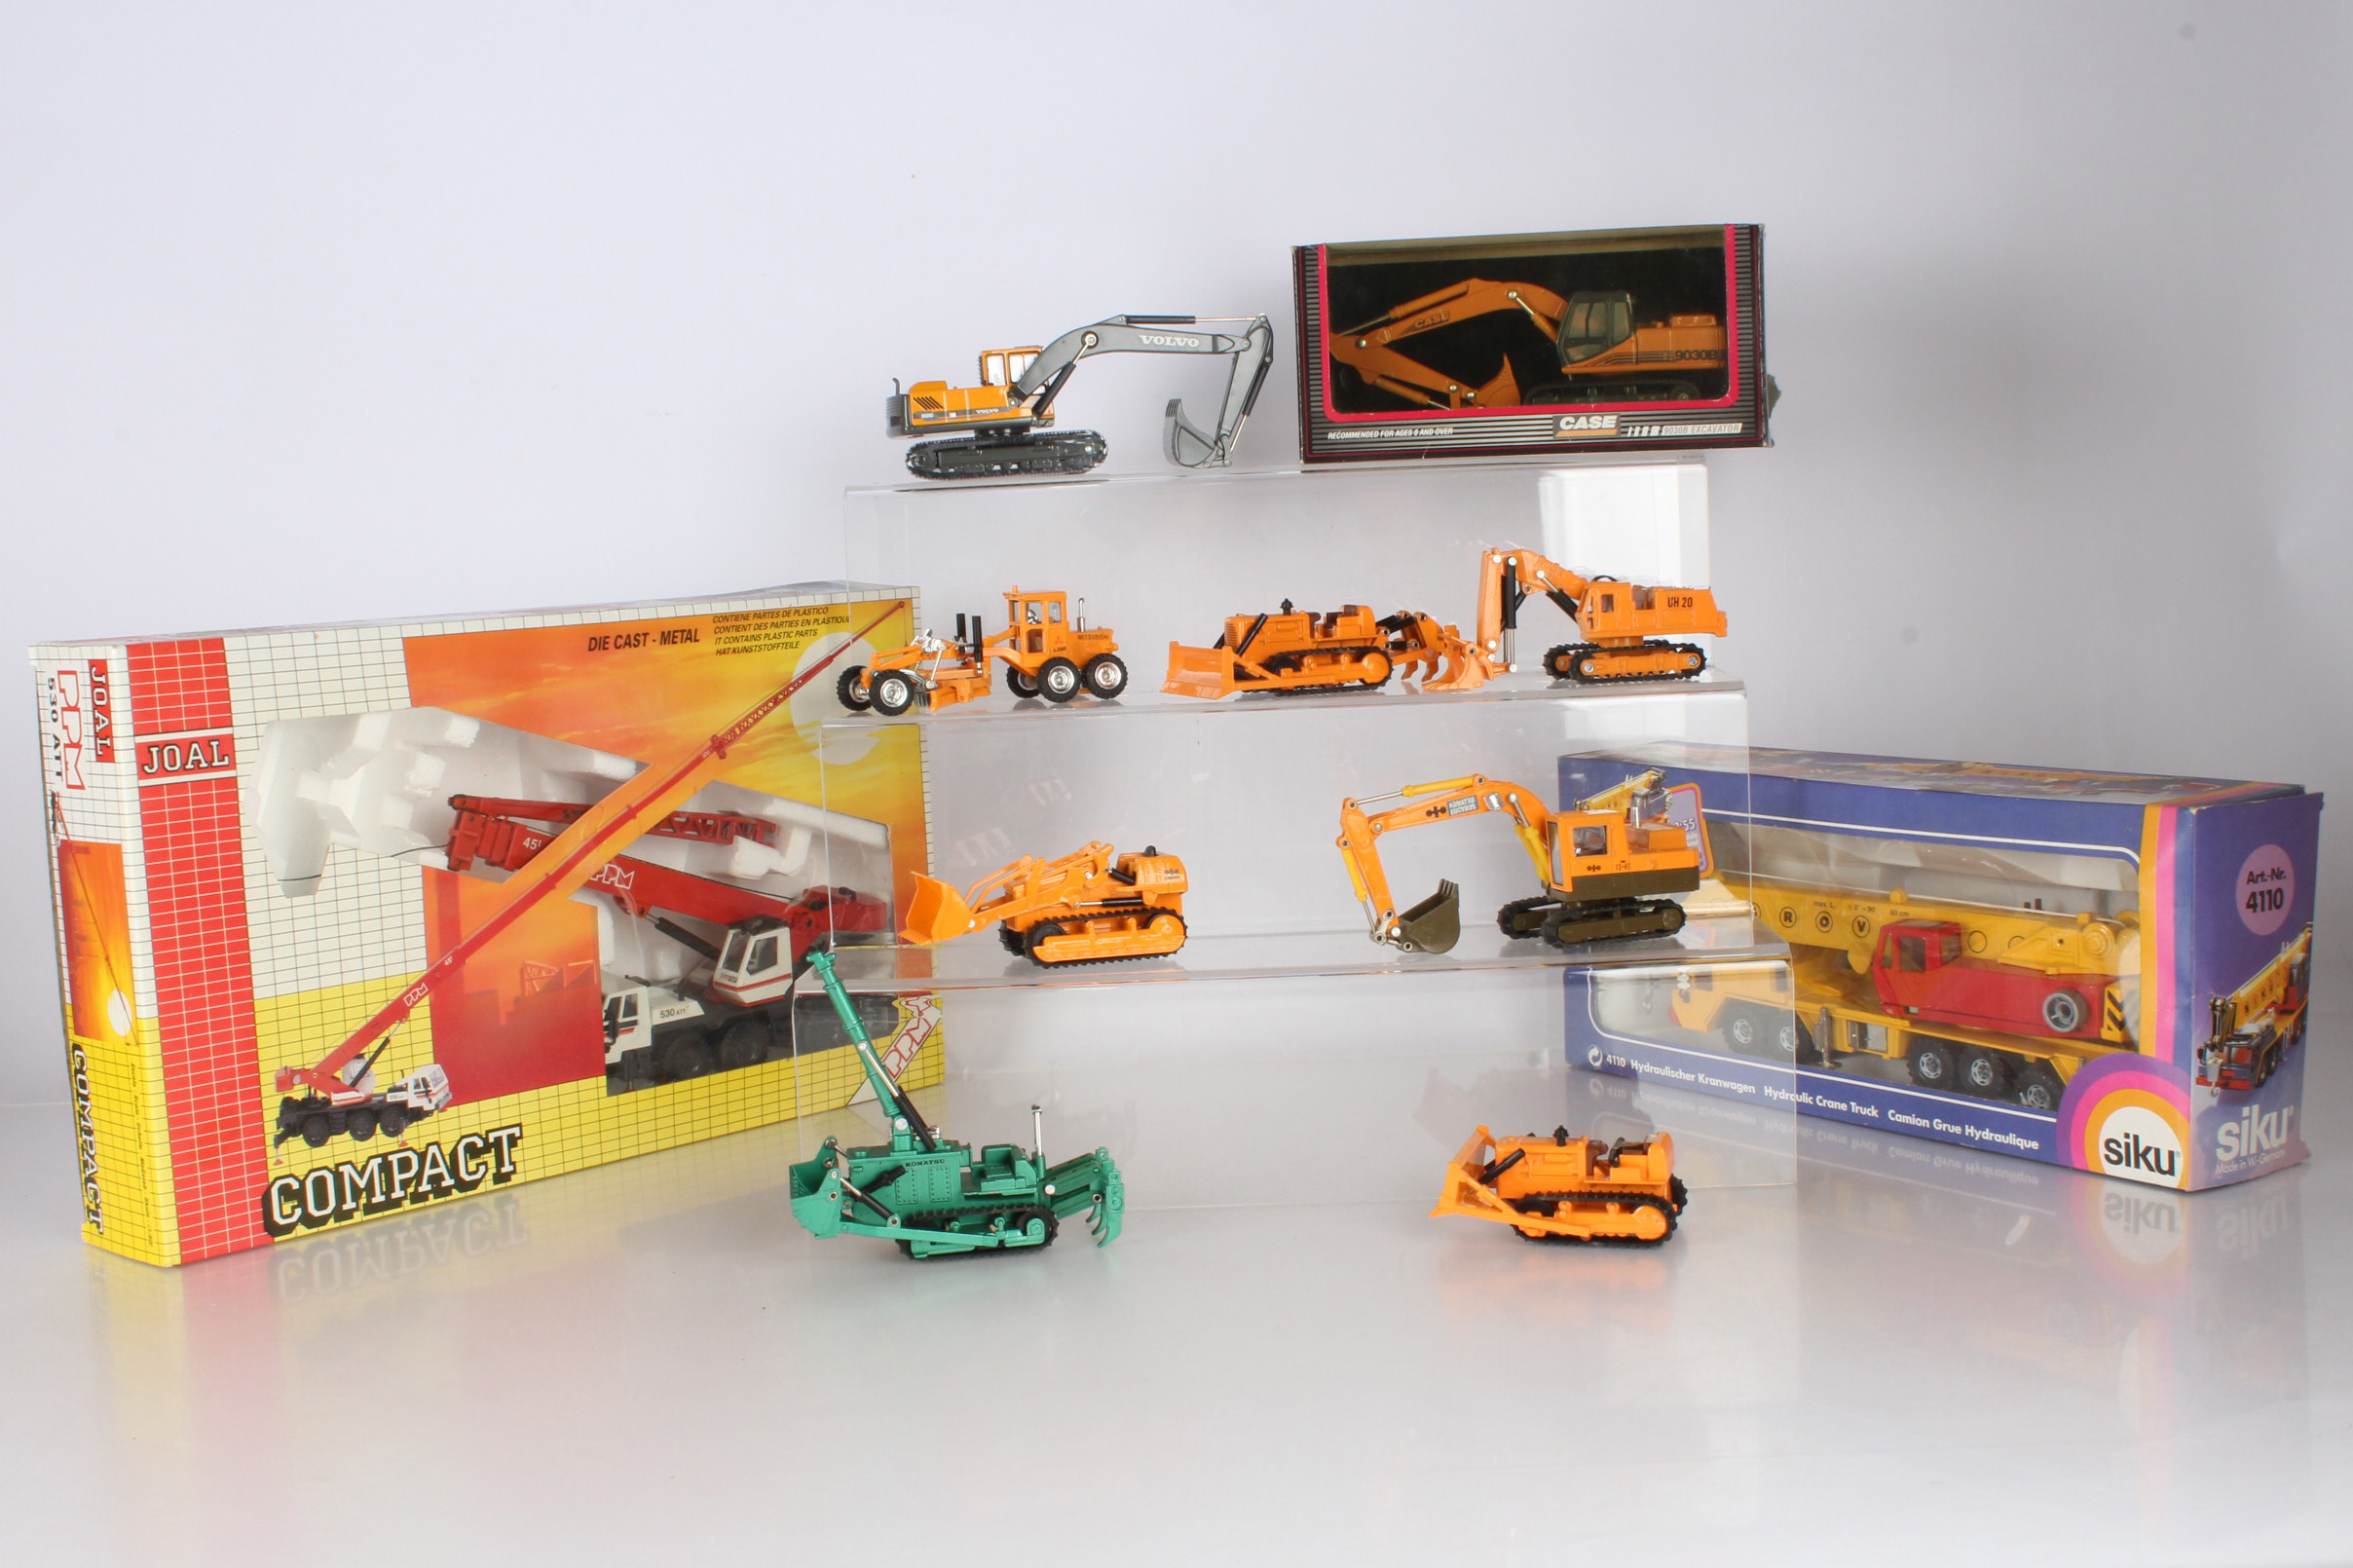 Modern Diecast Construction Vehicles, all boxed/bubble packed, 1:50 scale Joal Compact 168 PPM 530